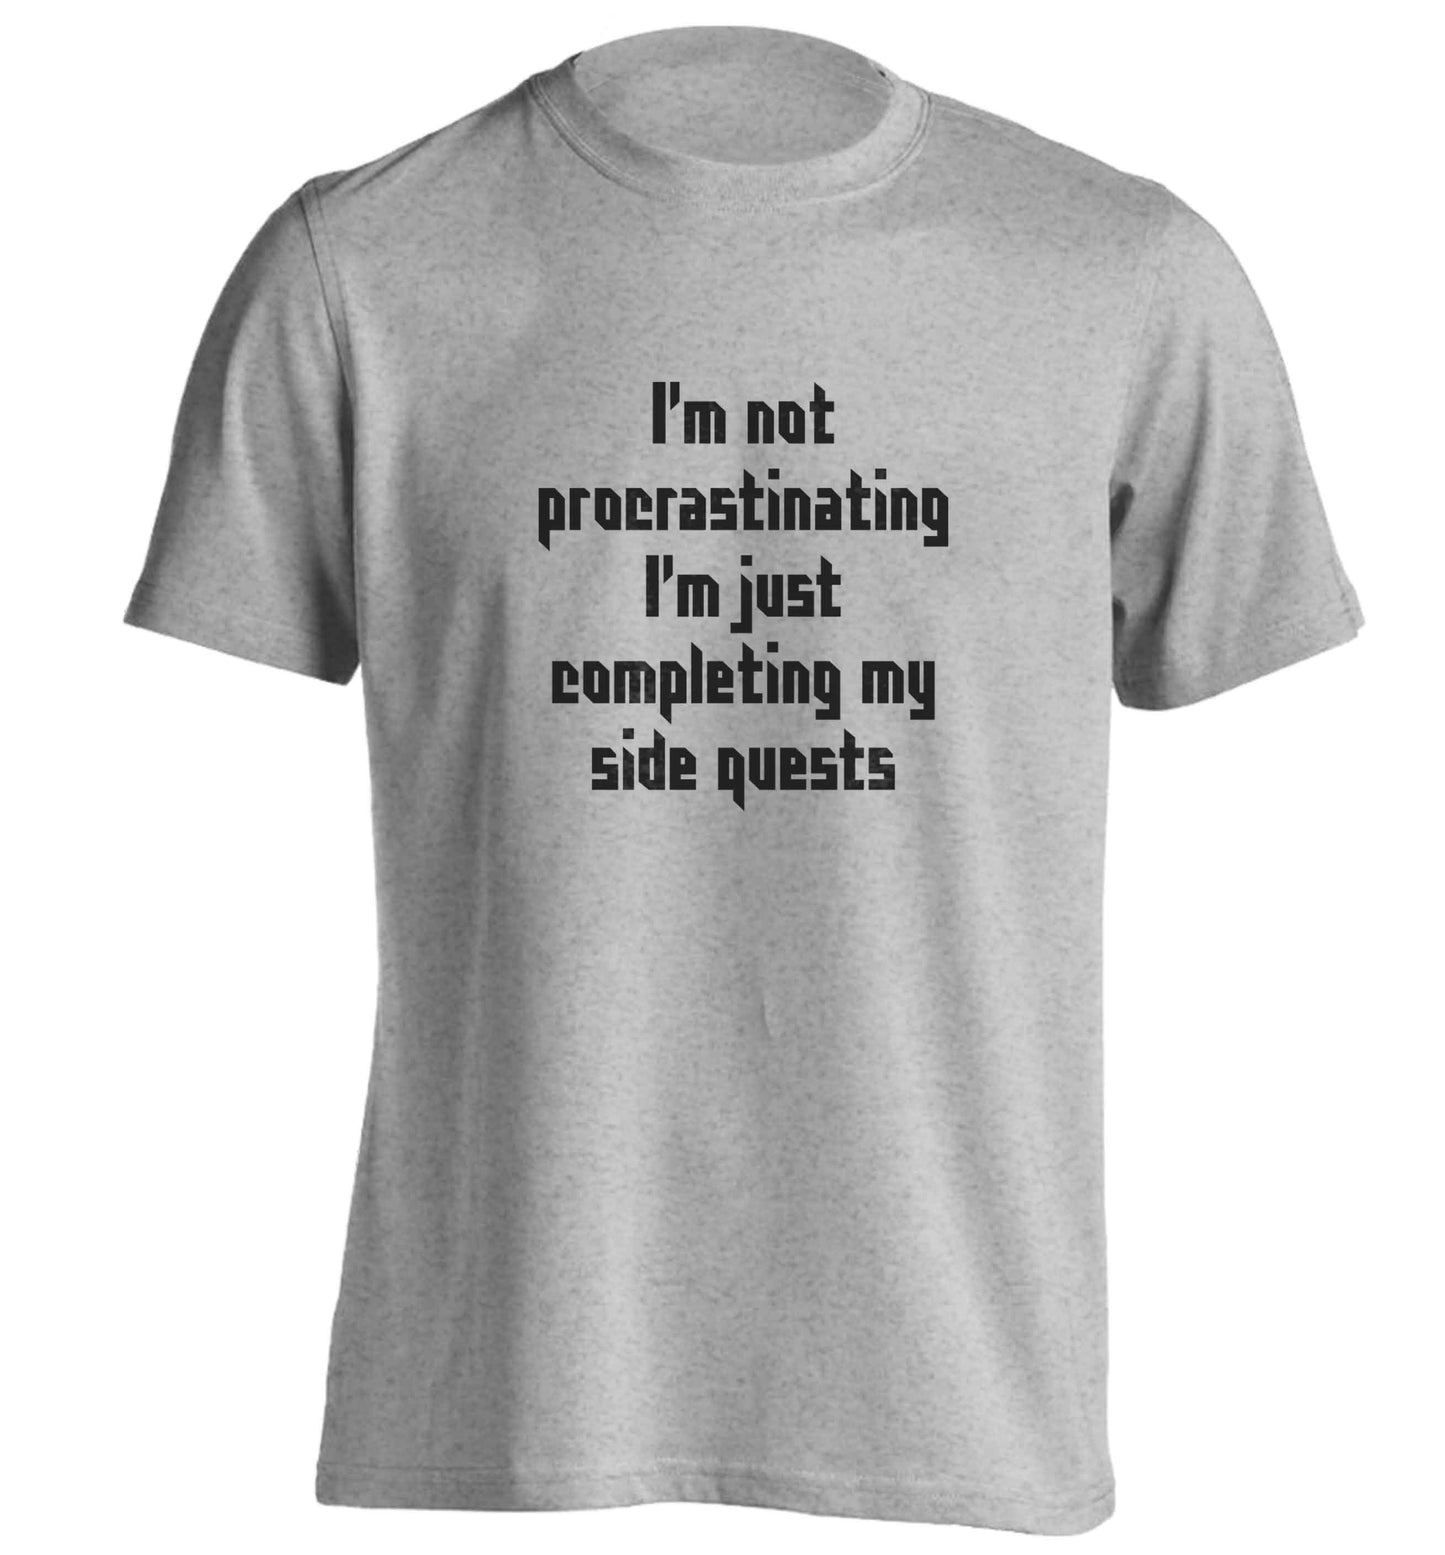 I'm not procrastinating I'm just completing my side quests adults unisex grey Tshirt 2XL